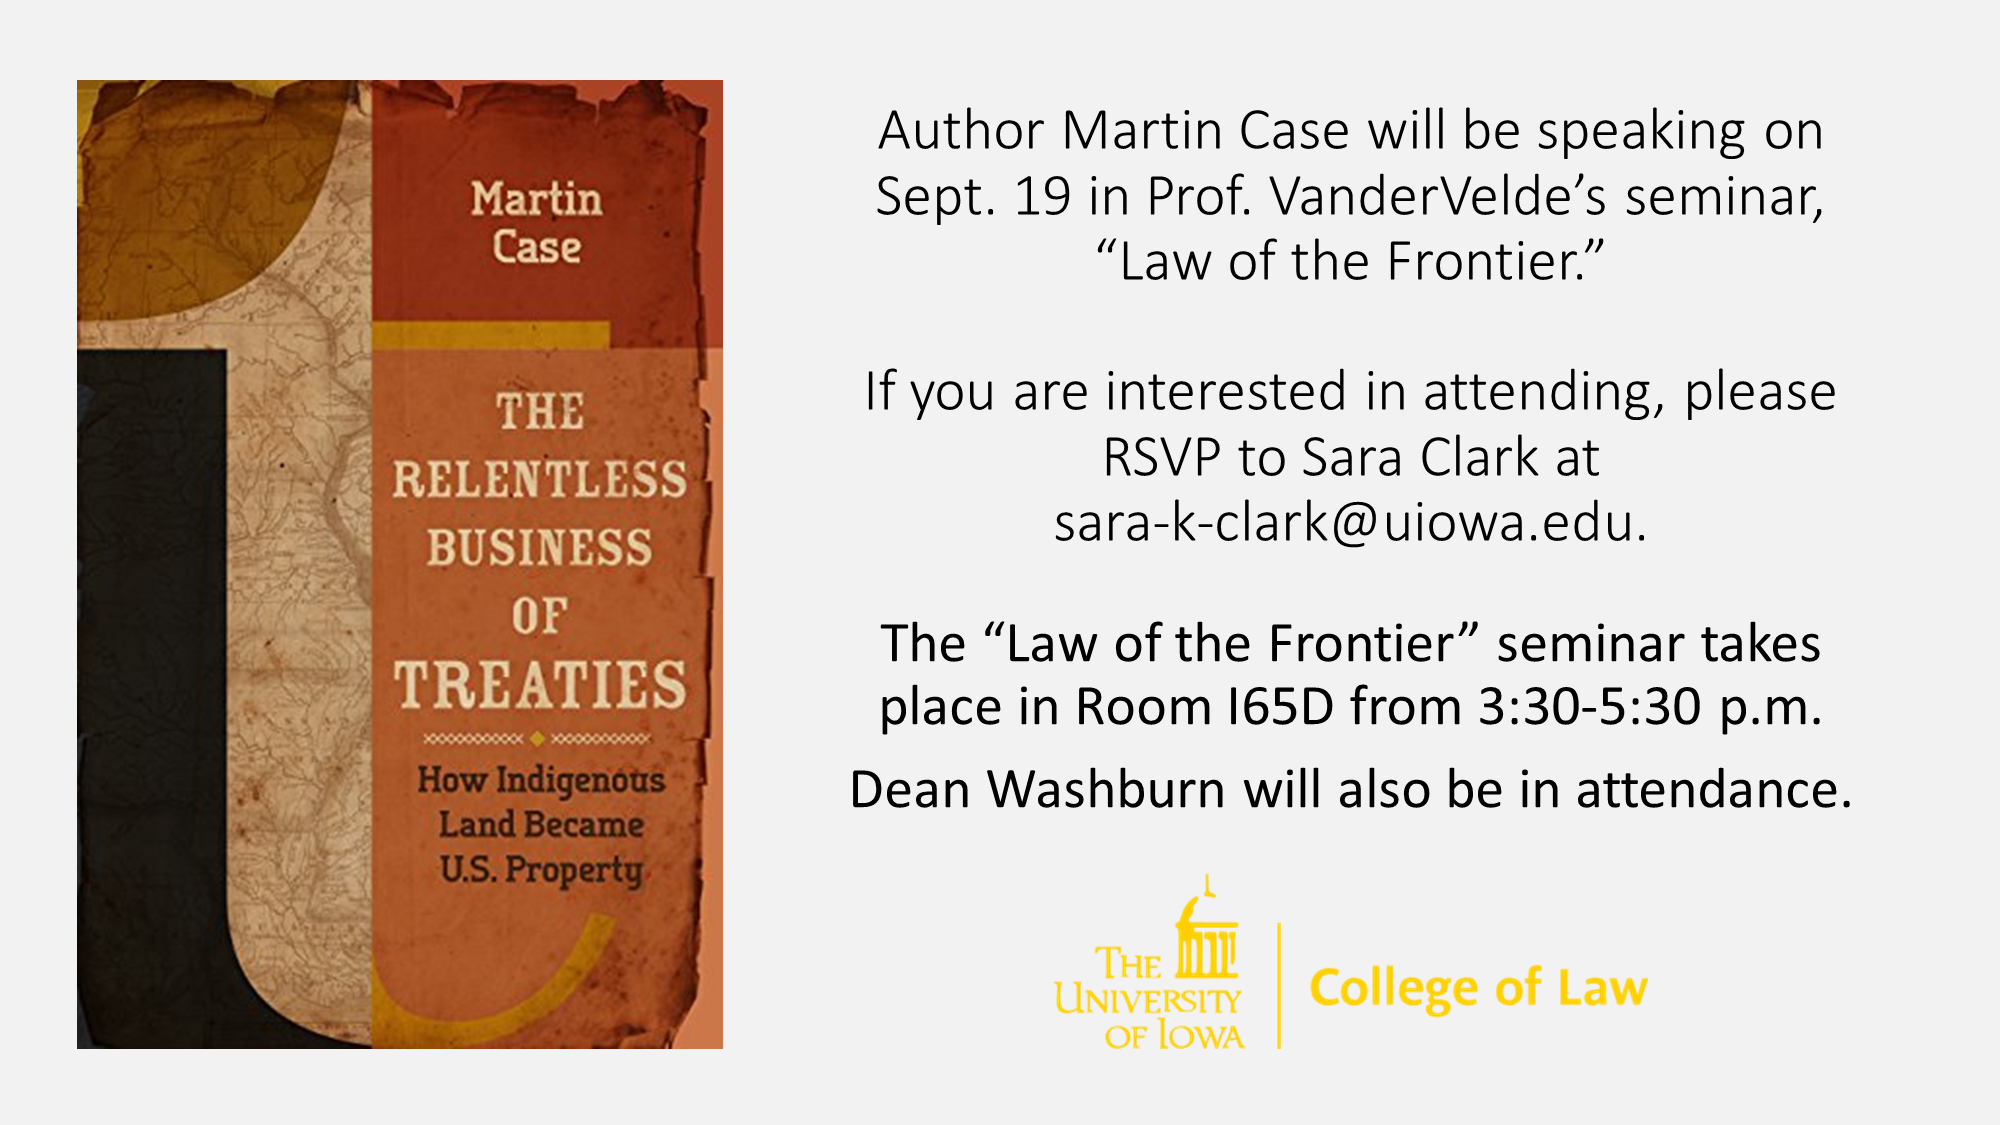 Author Martin Case will be speaking on Sept. 19 in Prof. VanderVelde’s seminar, “Law of the Frontier.” If you are interested in attending, please RSVP to Sara Clark at sara-k-clark@uiowa.edu.The “Law of the Frontier” seminar takes place in Room I65D from 3:30-5:30 p.m. Dean Washburn will also be in attendance.